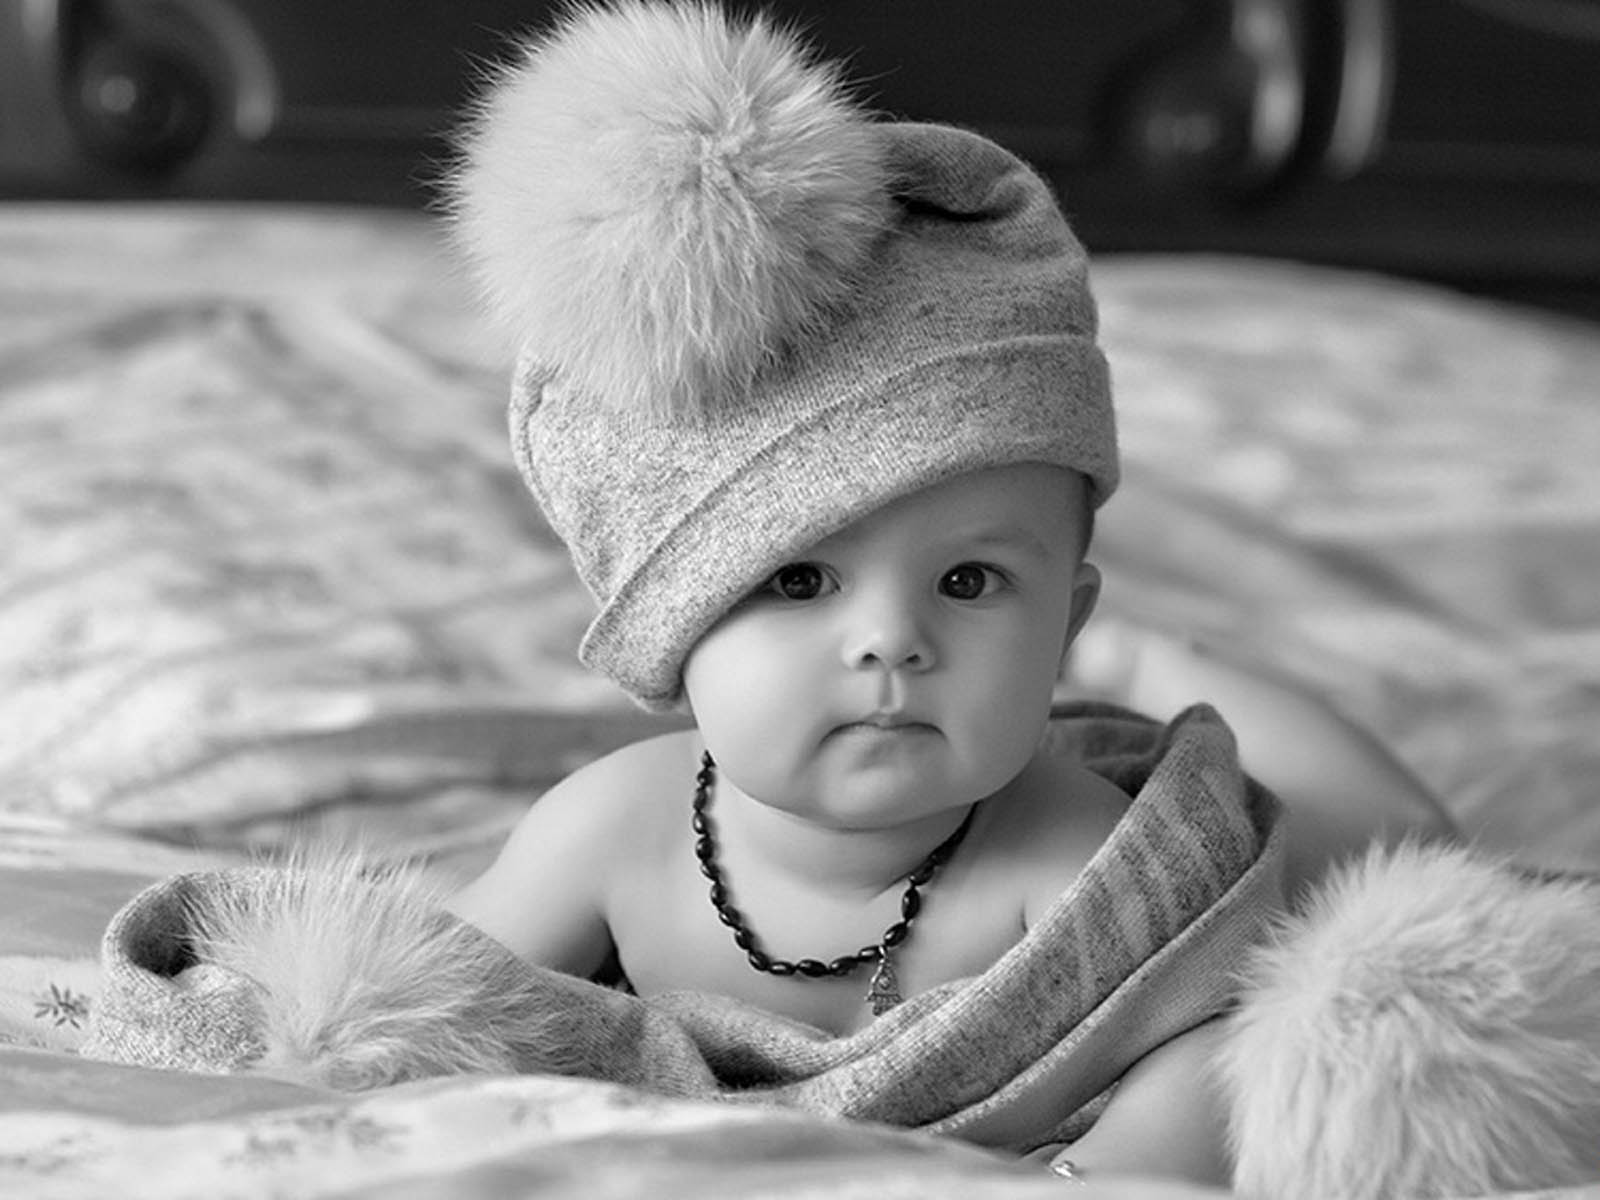  wallpaper  Babies  Black  And White Wallpapers 